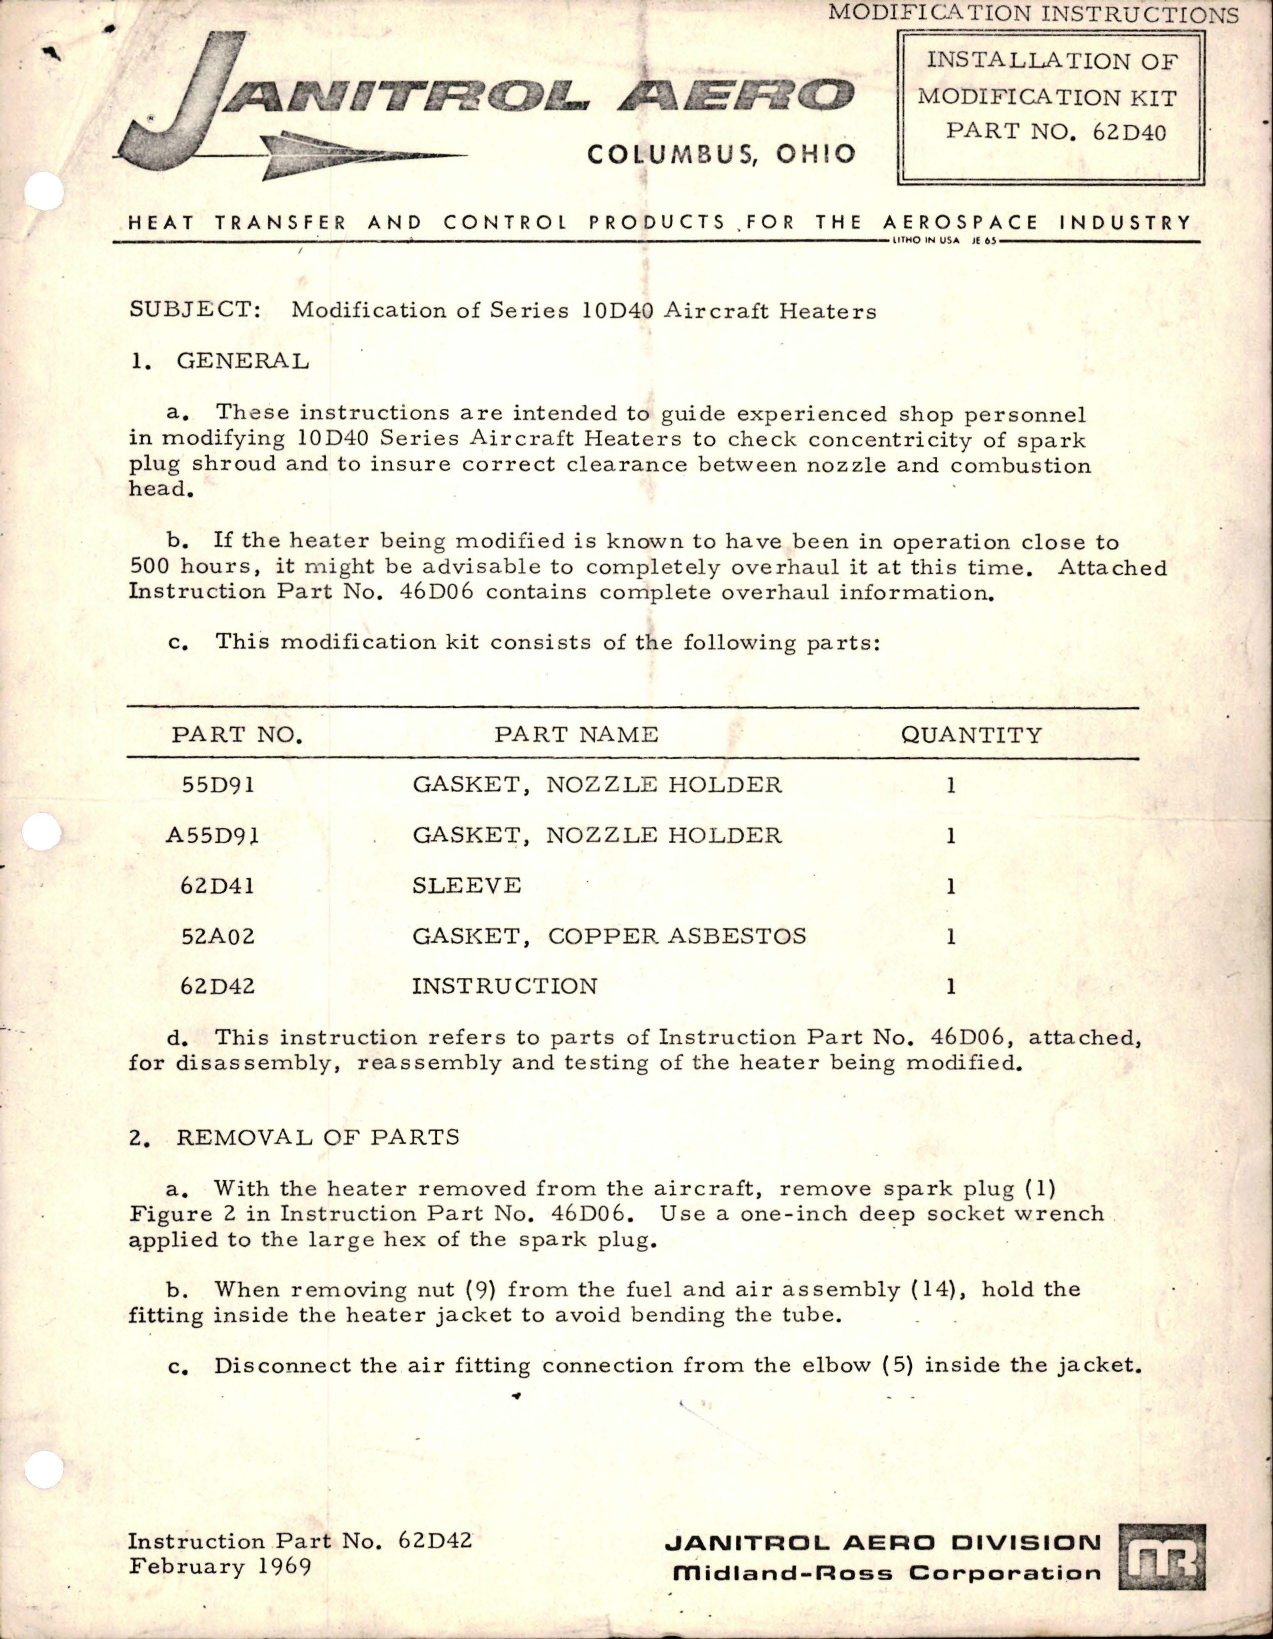 Sample page 1 from AirCorps Library document: Modification Instructions for Installation of Modification Kit - Part 62D40